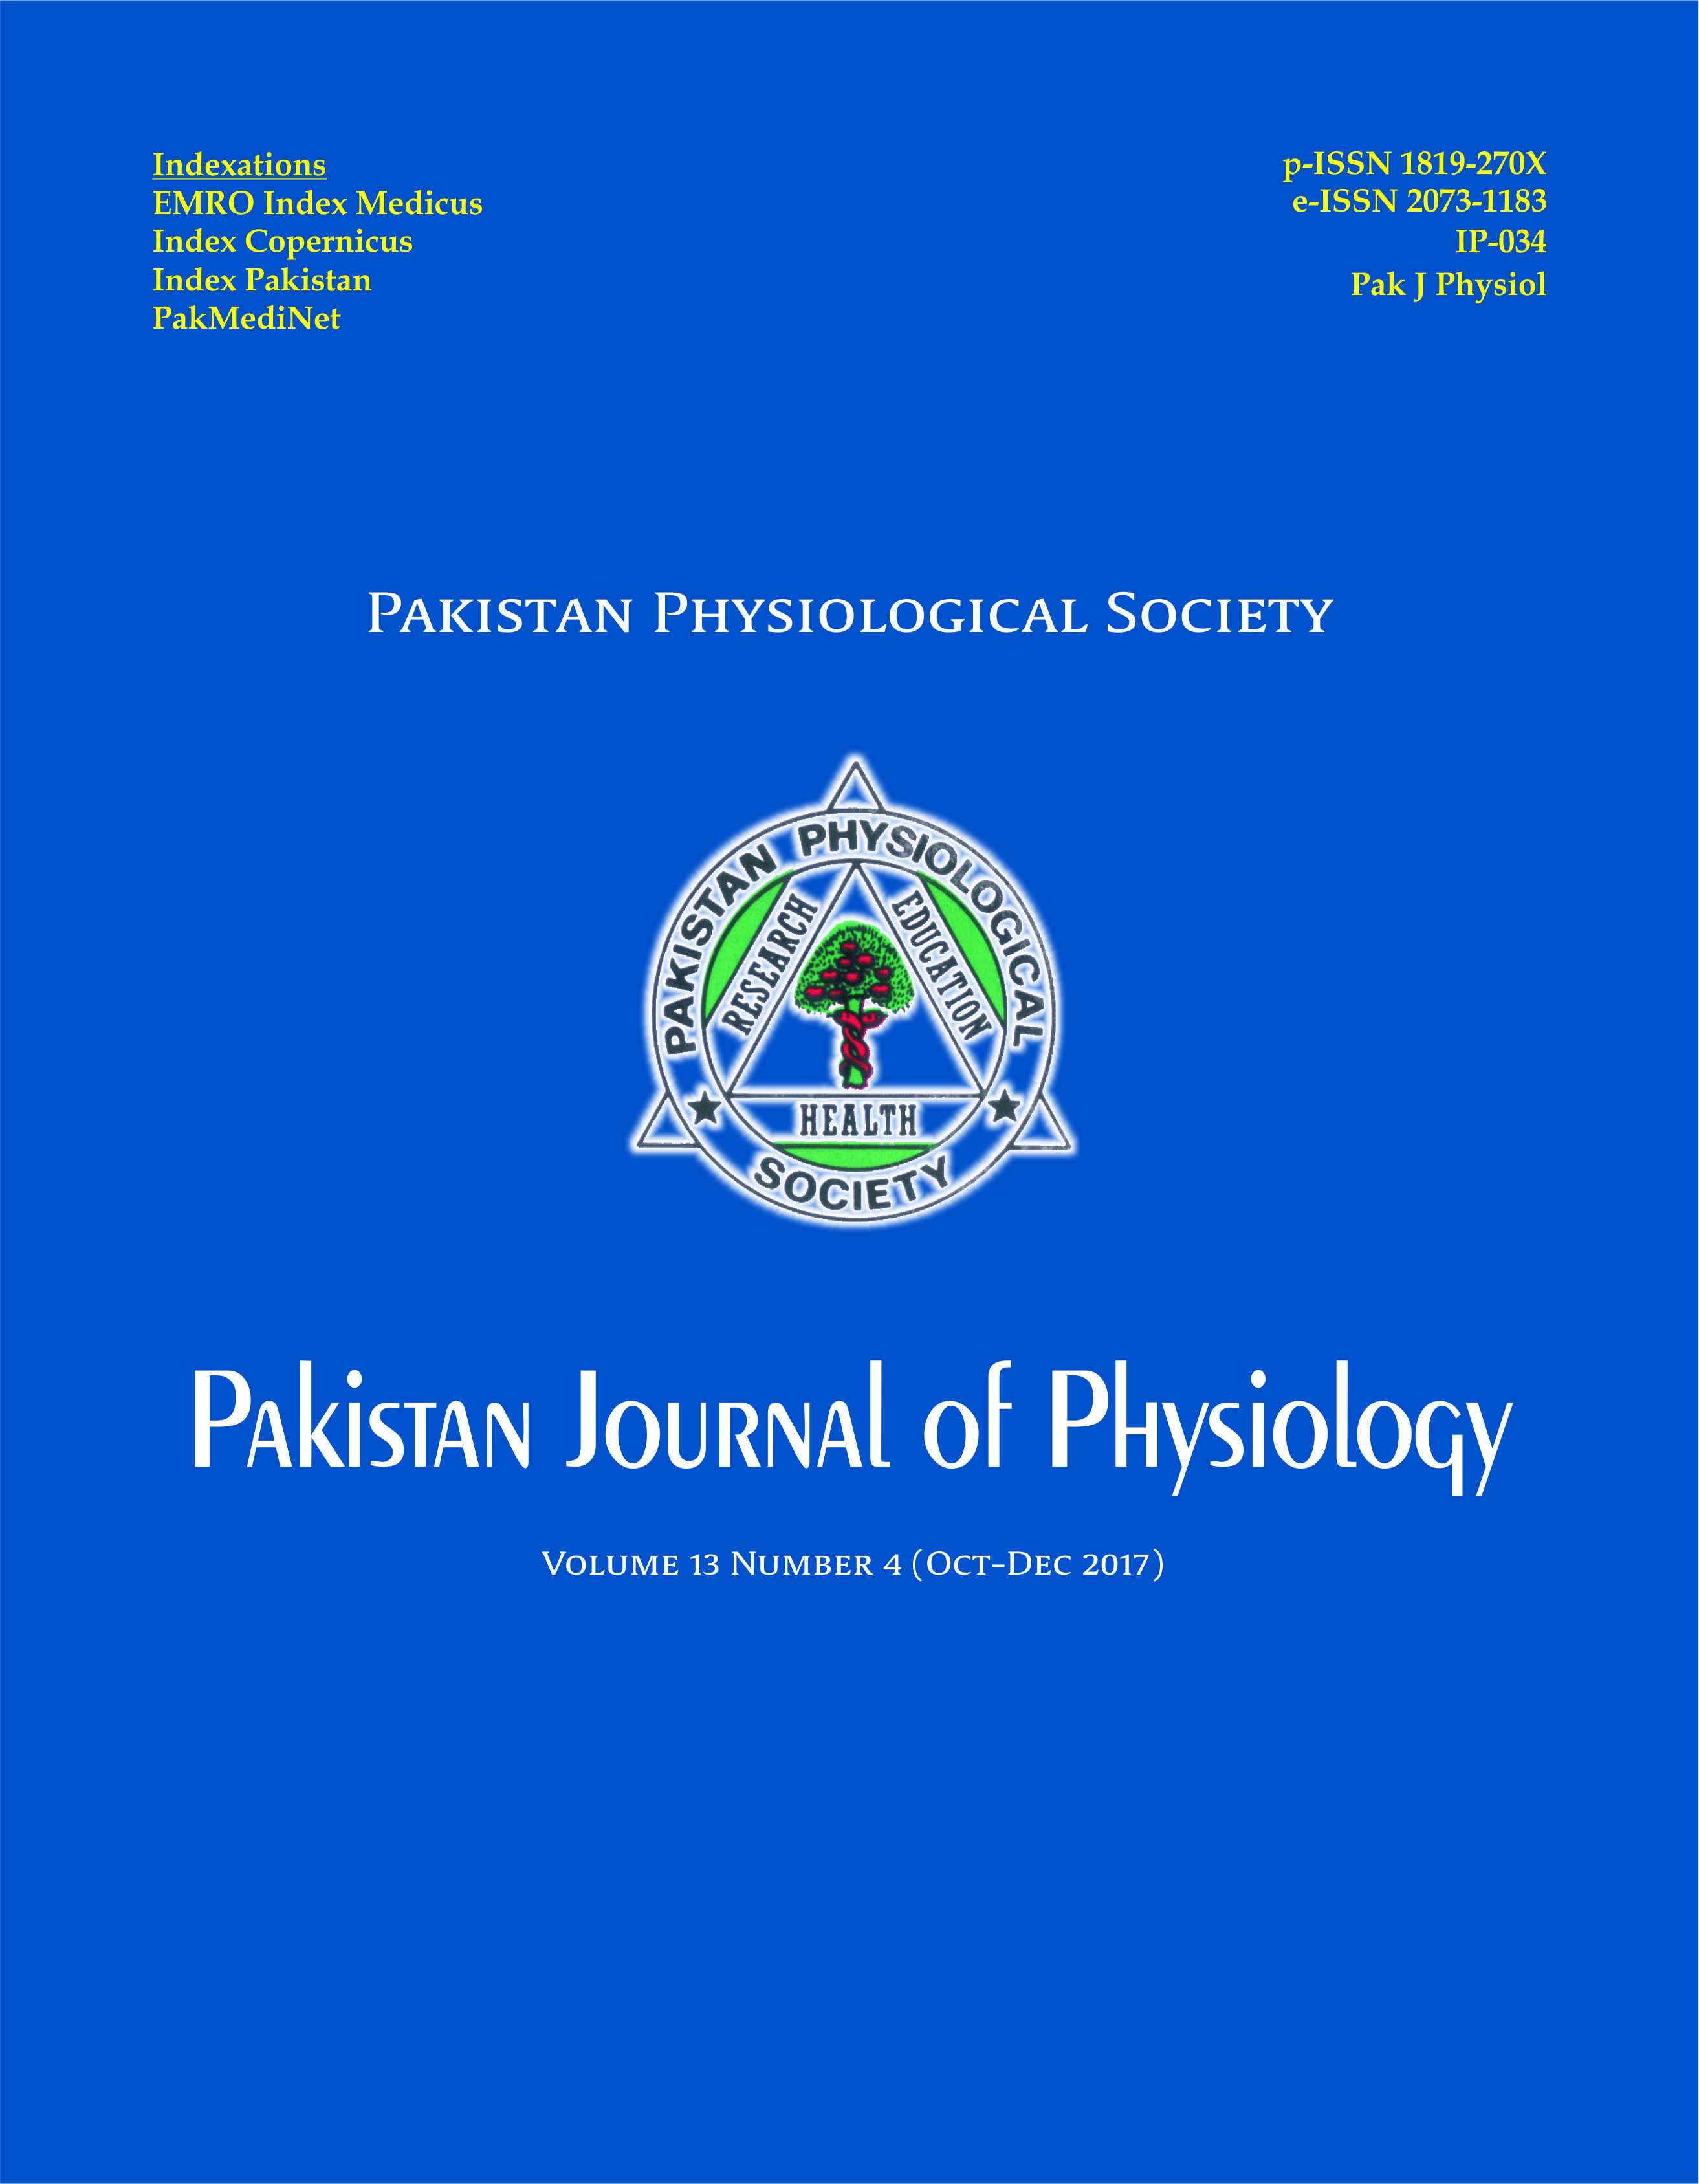 					View Vol. 13 No. 4 (2017): Pakistan Journal of Physiology
				